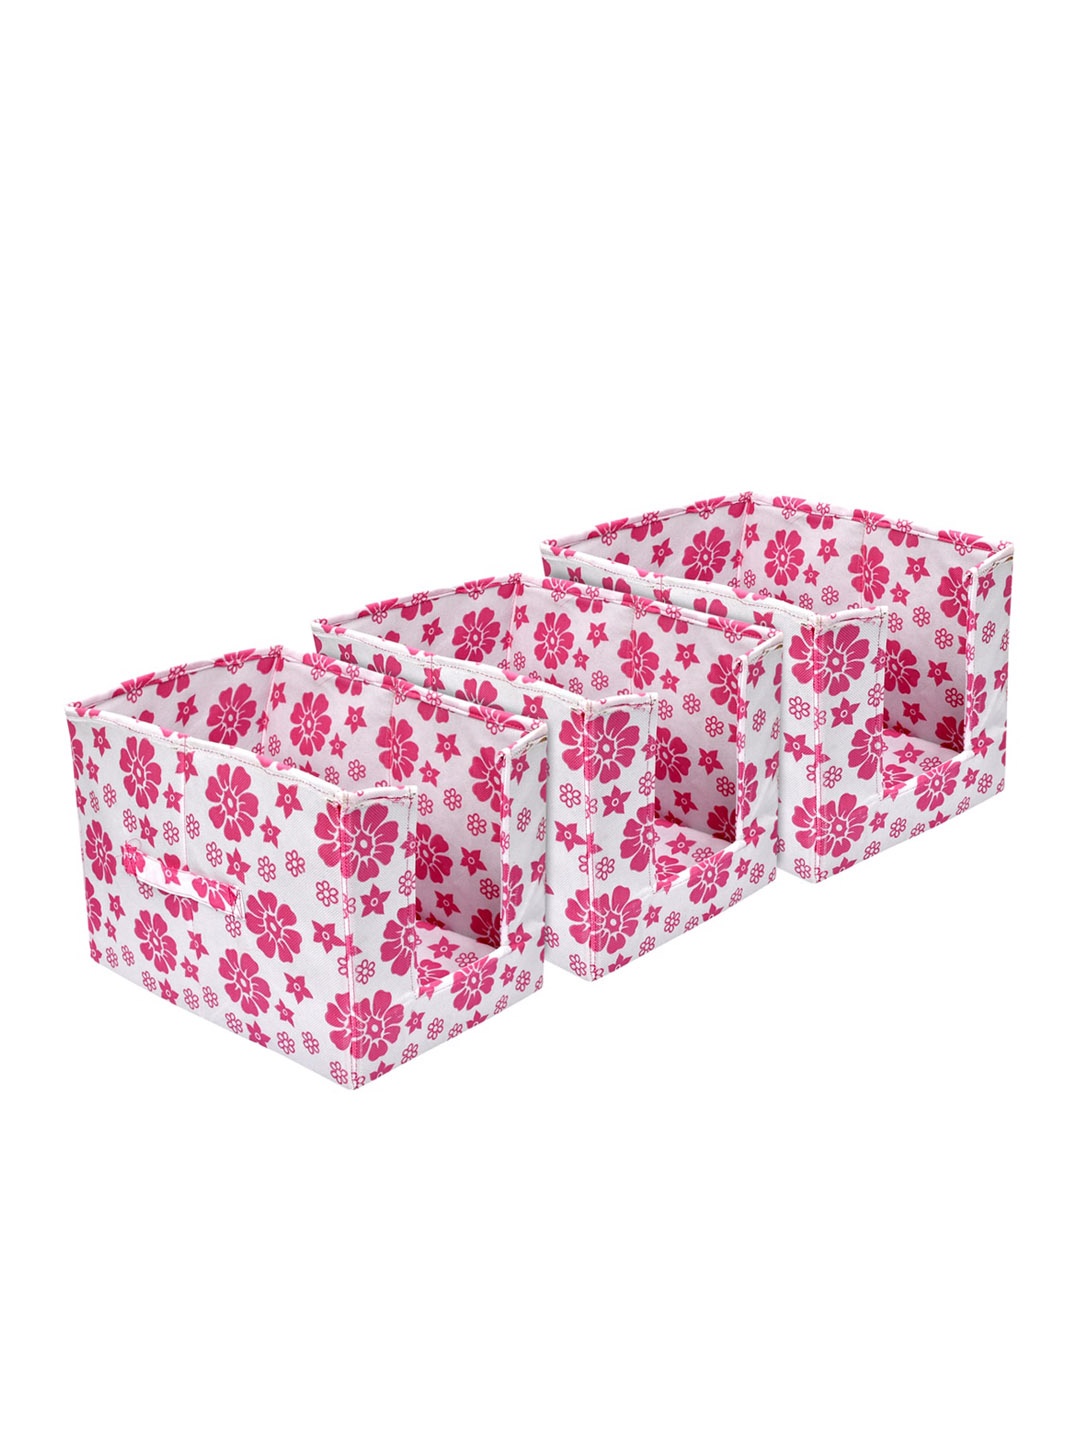 

Kuber Industries Set Of 3 White & Pink Flower Printed Shirt Stacker Organisers With Handles